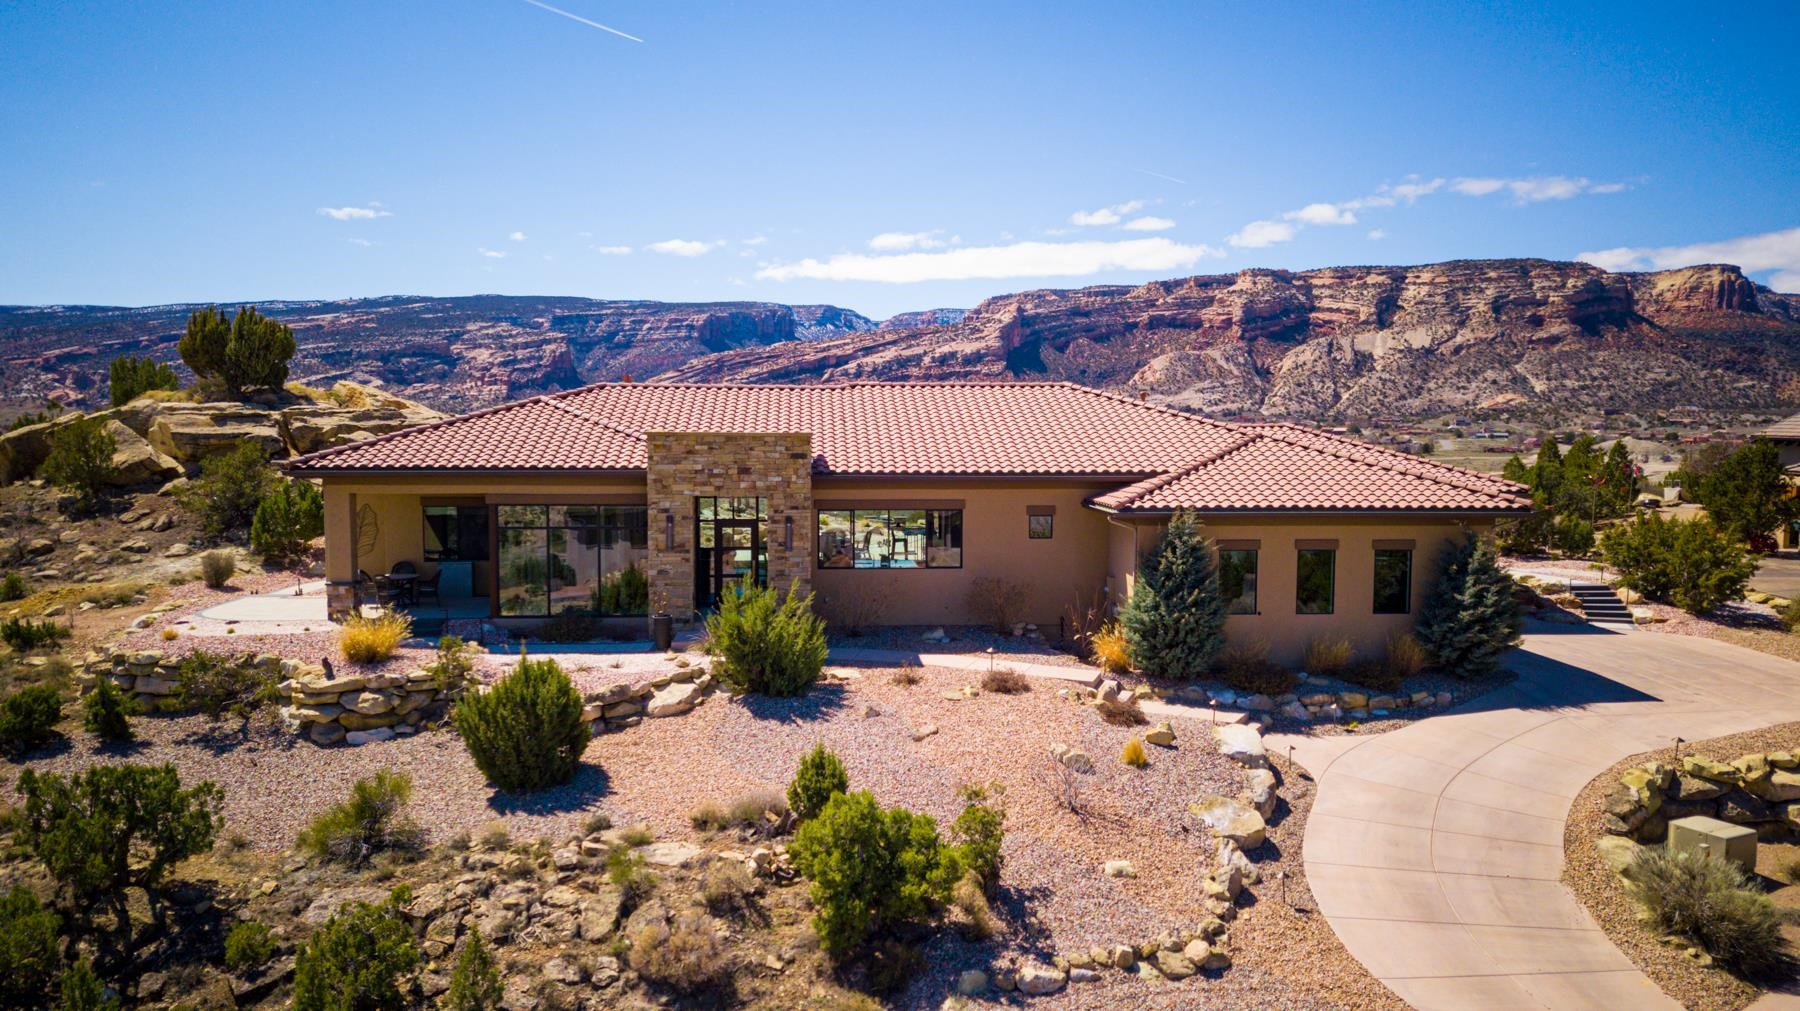 Live in one of the premier spectacular settings in all of Grand Junction.  This 3000 sq. ft Conquest built ranch style home is strategically tucked away on the south side of Redlands Mesa.  Located just off the elevated 4th tee box of the highly acclaimed Redlands Mesa Golf Course.  Incredible 360 degree views of the Colorado National Monument, Grand Mesa, Bookcliff Mountains, and the Valley Floor.  Owners own controlling interest in front lot (2327), which guarantees the front corridor views.  Functional open concept floor plan, gourmet kitchen featuring high end appliances and a spacious walk in pantry. Two large entertainment areas with fireplace and formal dining adjoined.  Custom electric auto blinds (no batteries) to easily take in the views.  Hard wood flooring throughout. There are too many custom features to detail. Fabulous professional landscaping with a firepit & covered fireplace area. State of the art custom lighting & cascading waterfall feature. Views, Views, Views!  Must view this spectacular property to appreciate!